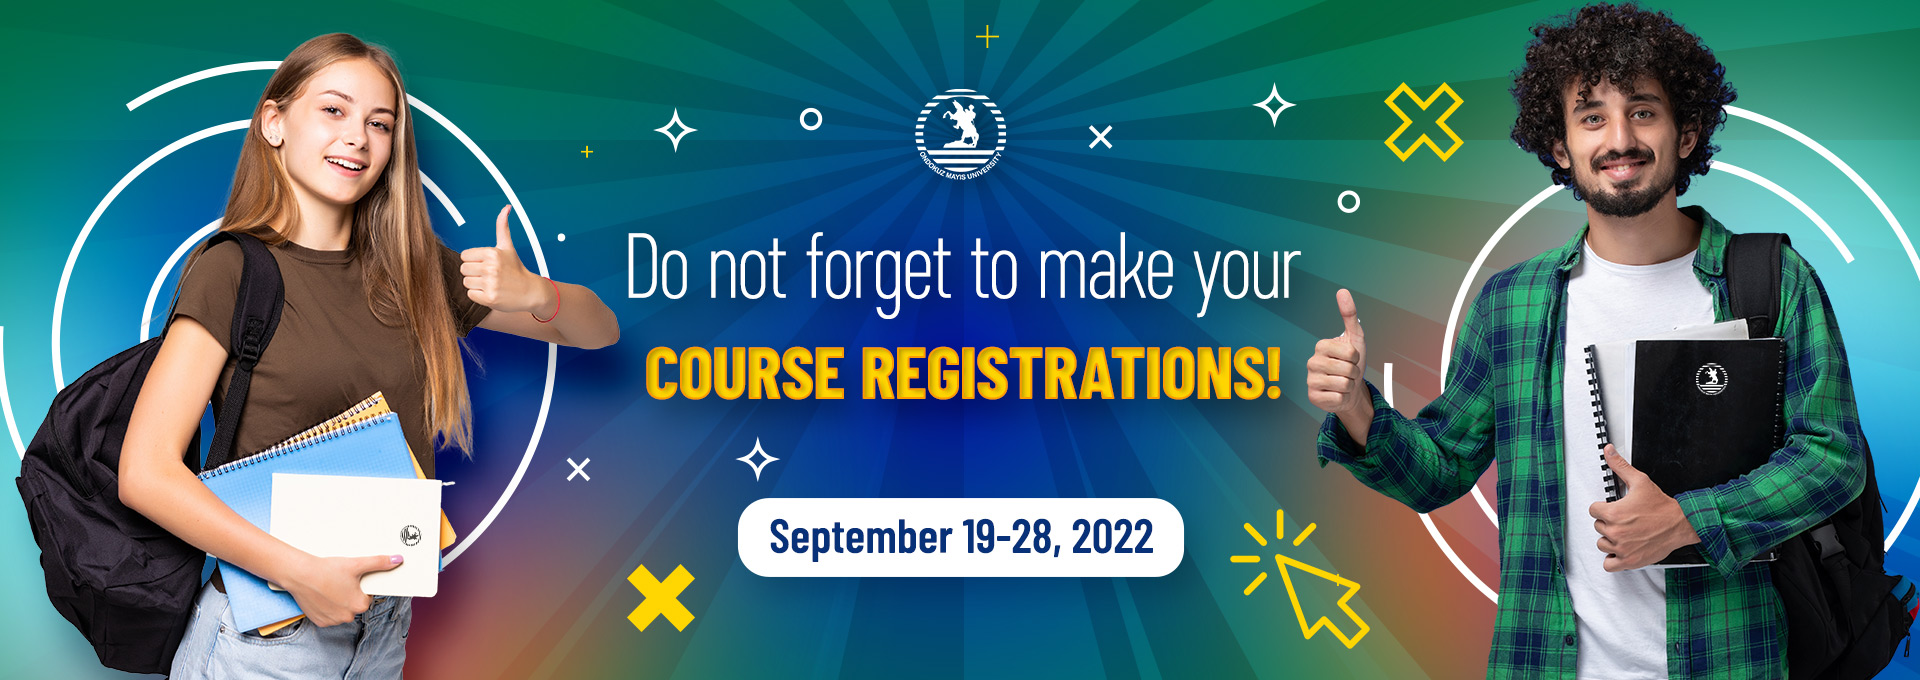 Do not forget to make your course registrations!